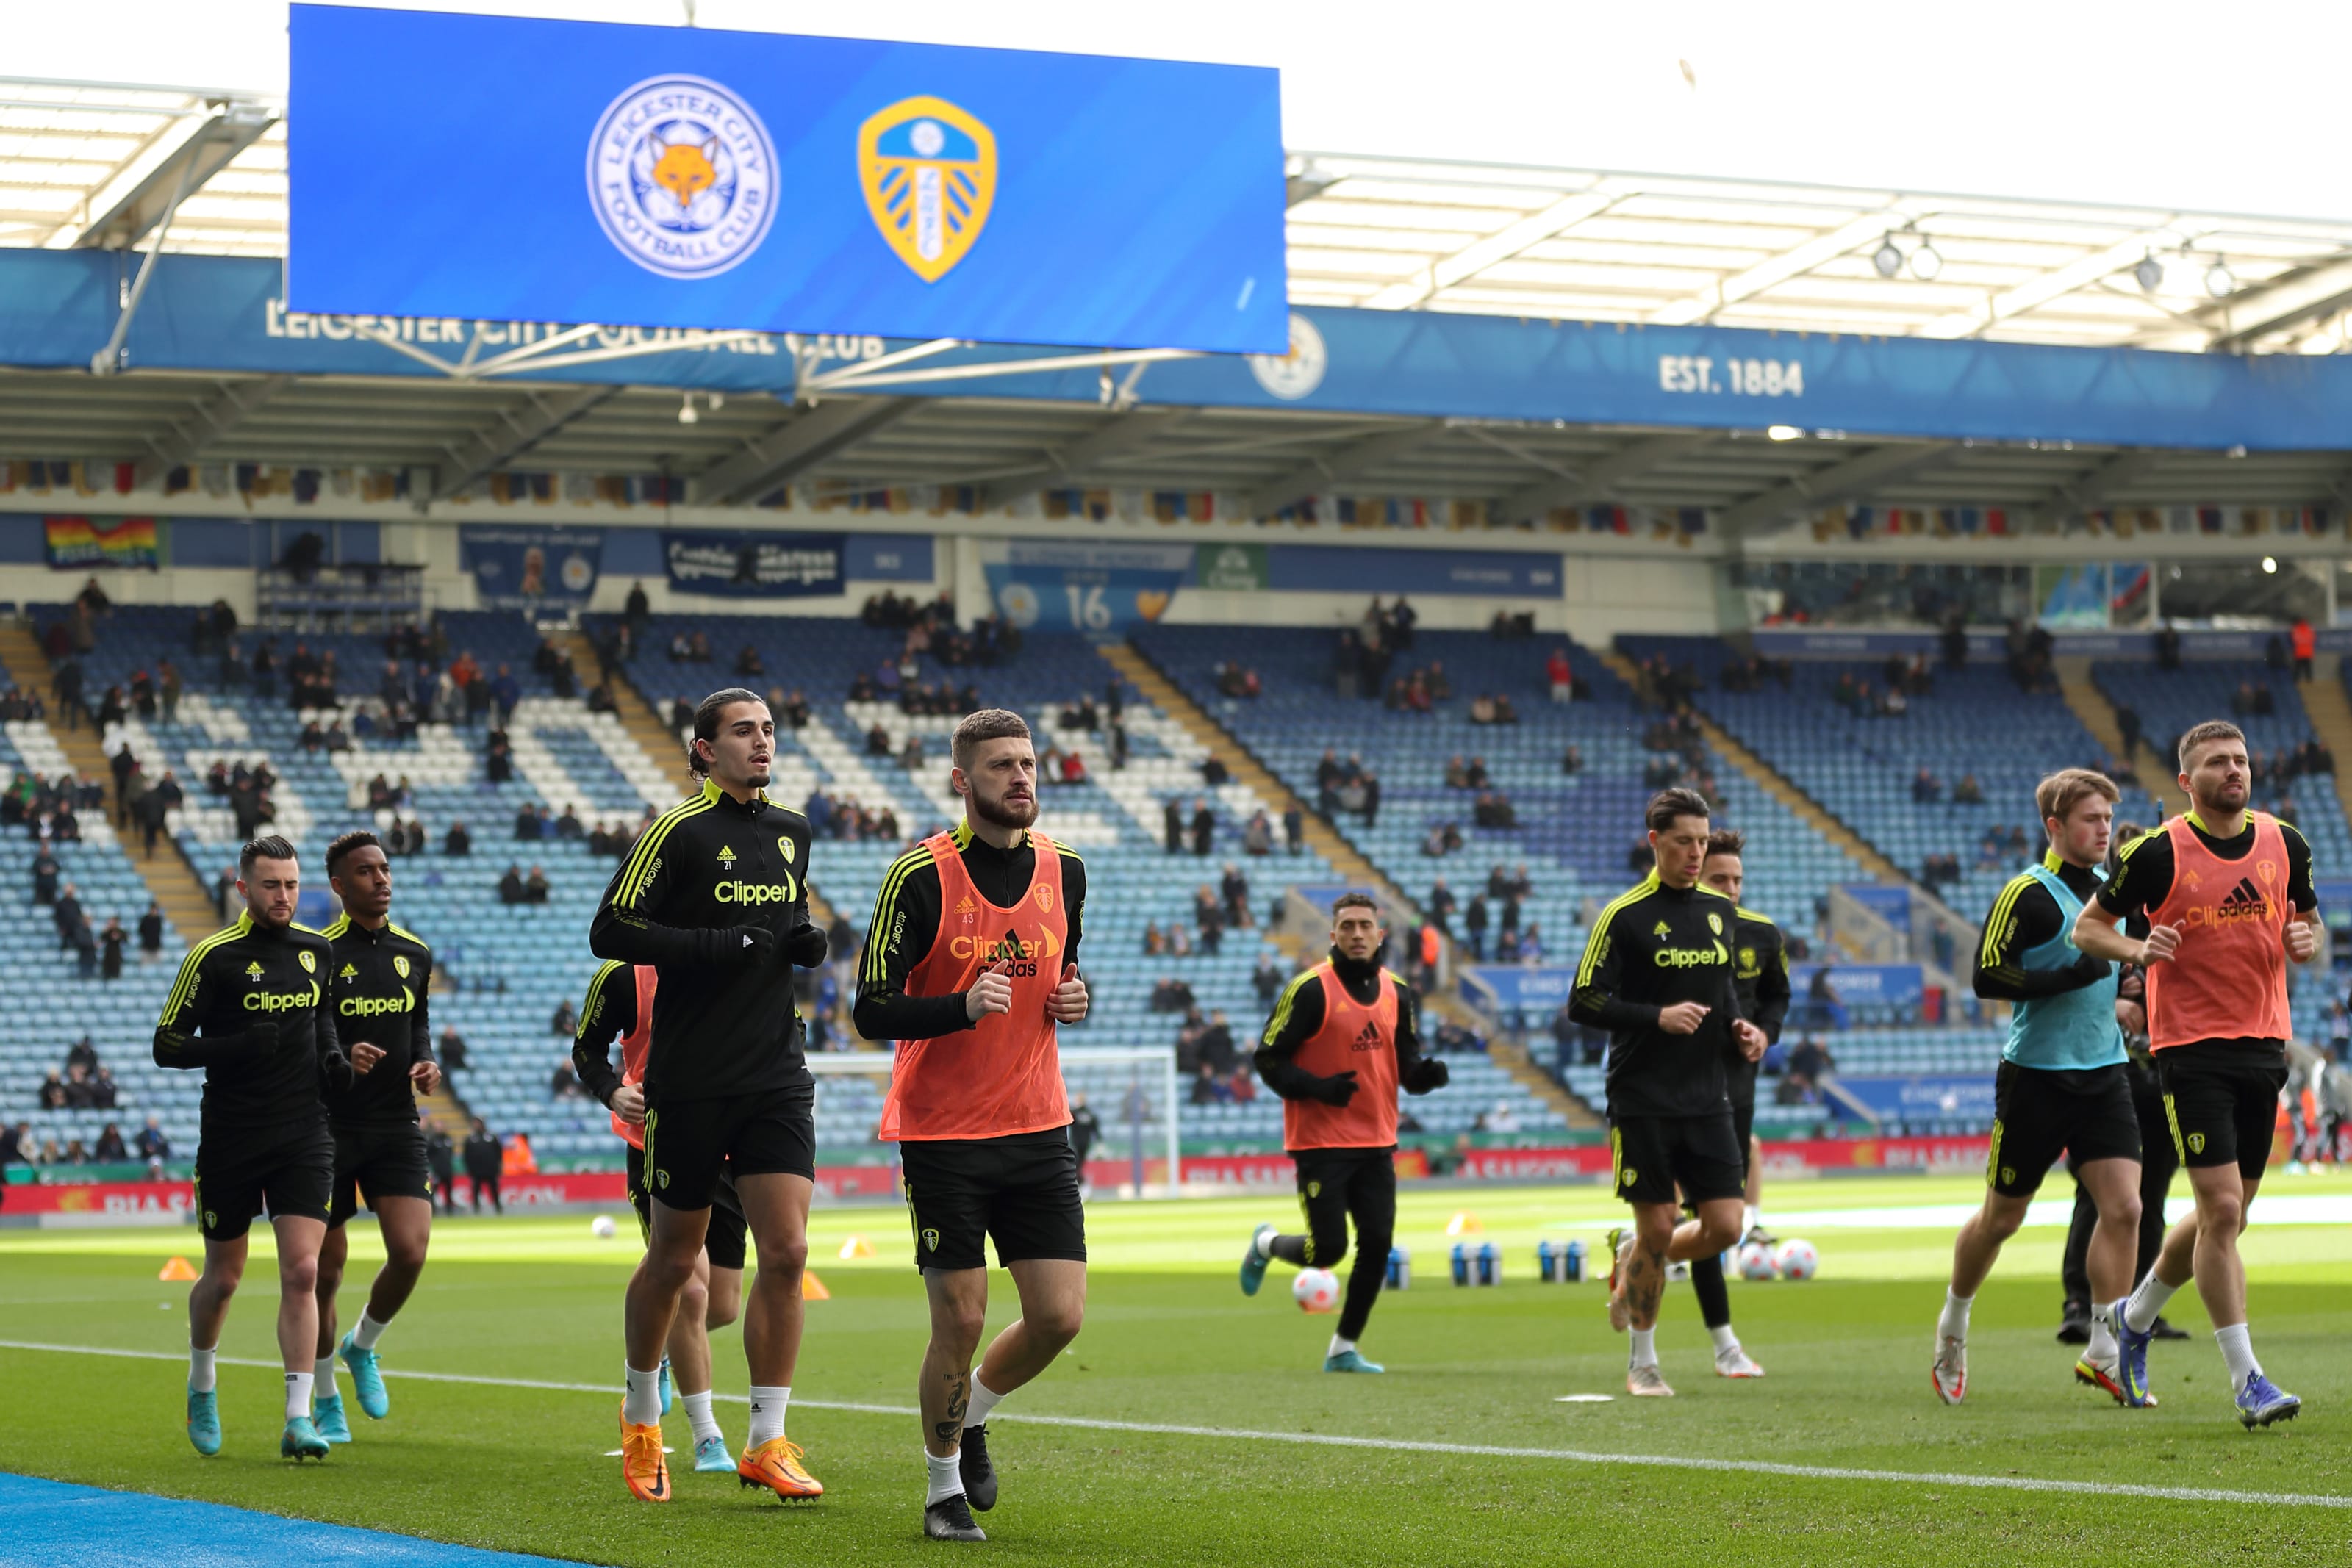 Leicester City v Leeds United match preview and predictions